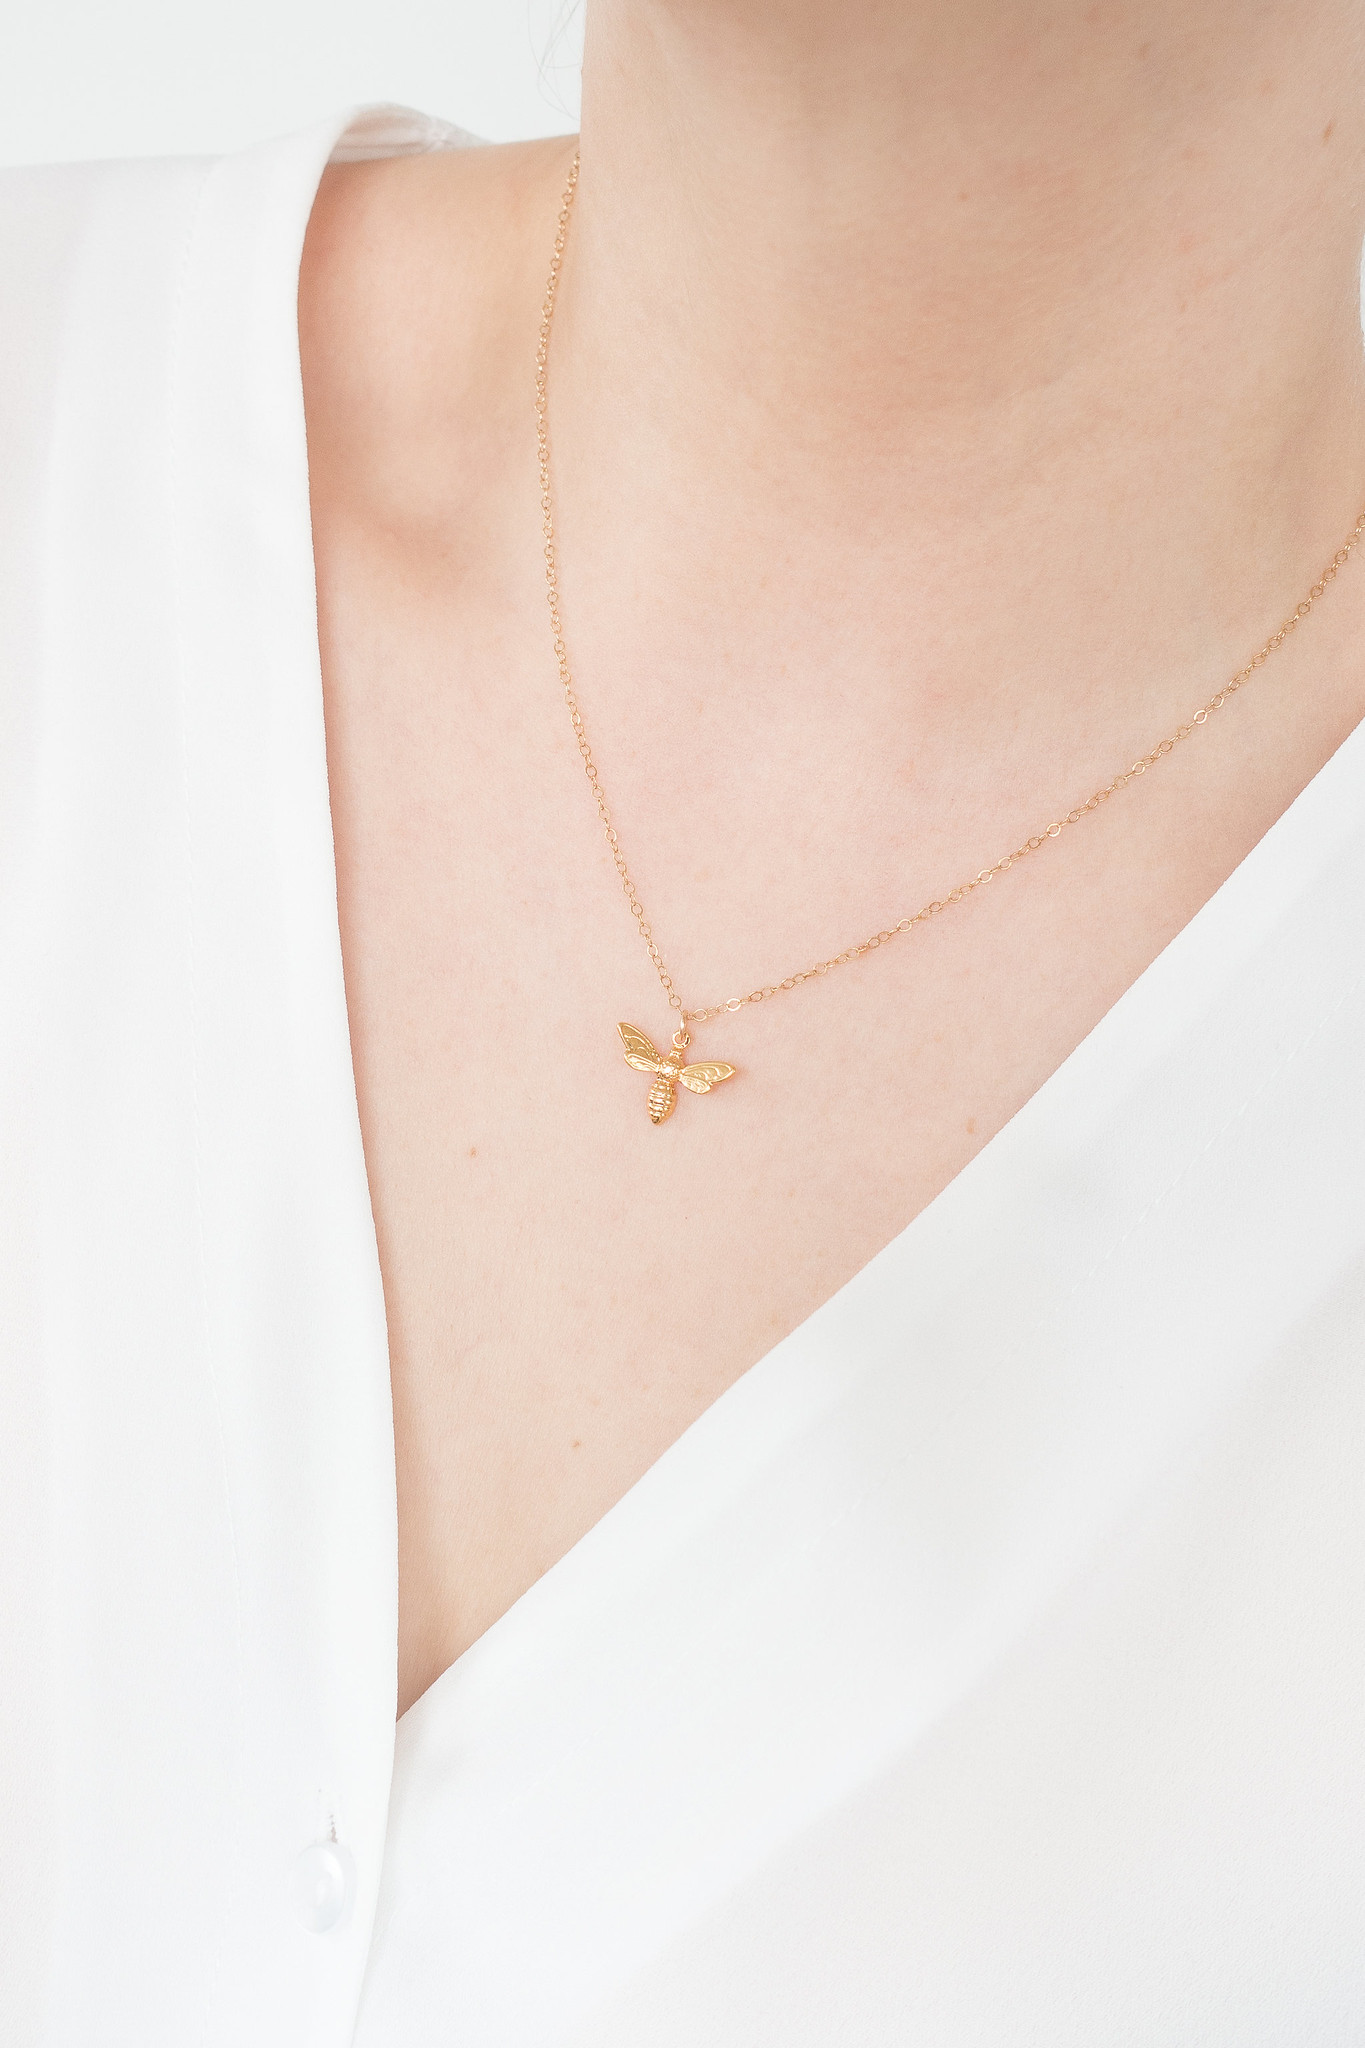 Eco-Friendly Jewellery Gifts Made in the UK